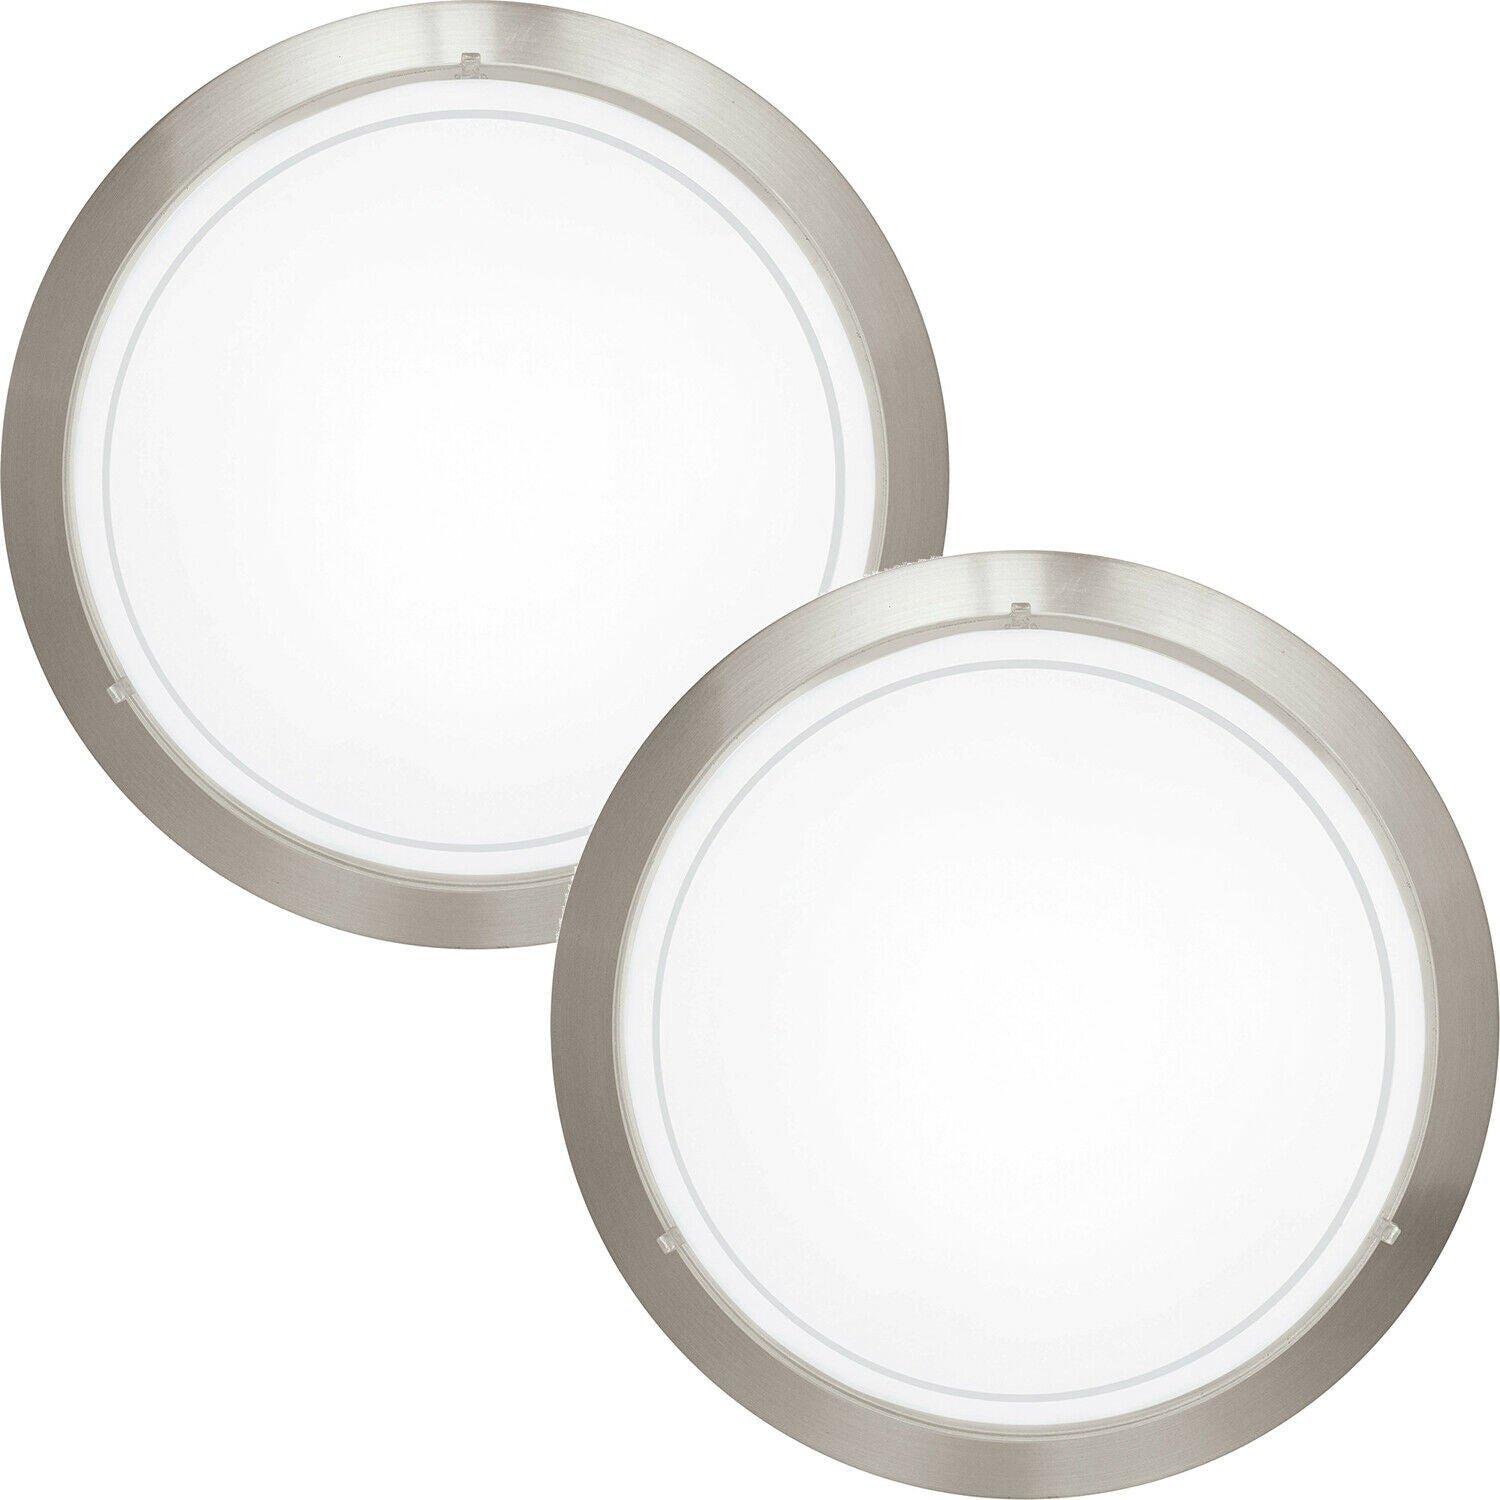 2 PACK Wall Flush Ceiling Light Satin Nickel White Clear Glass Painted E27 60W